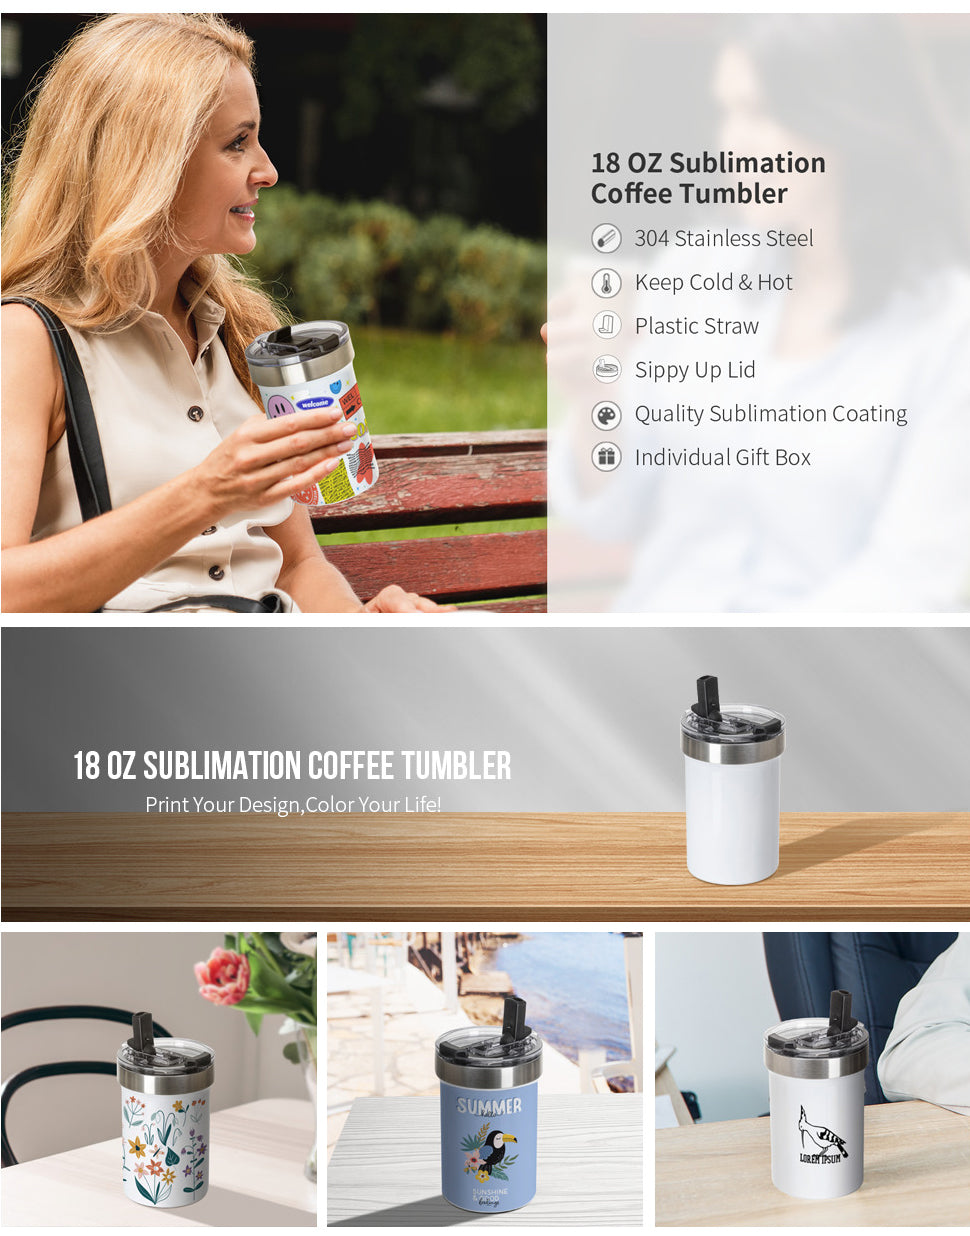 PYD Life Sublimation Tumblers Blanks with Handle 20 oz White Coffee Mugs Insulated Reusable Travel Cups with Leakproof Lid and Stainless Straw for